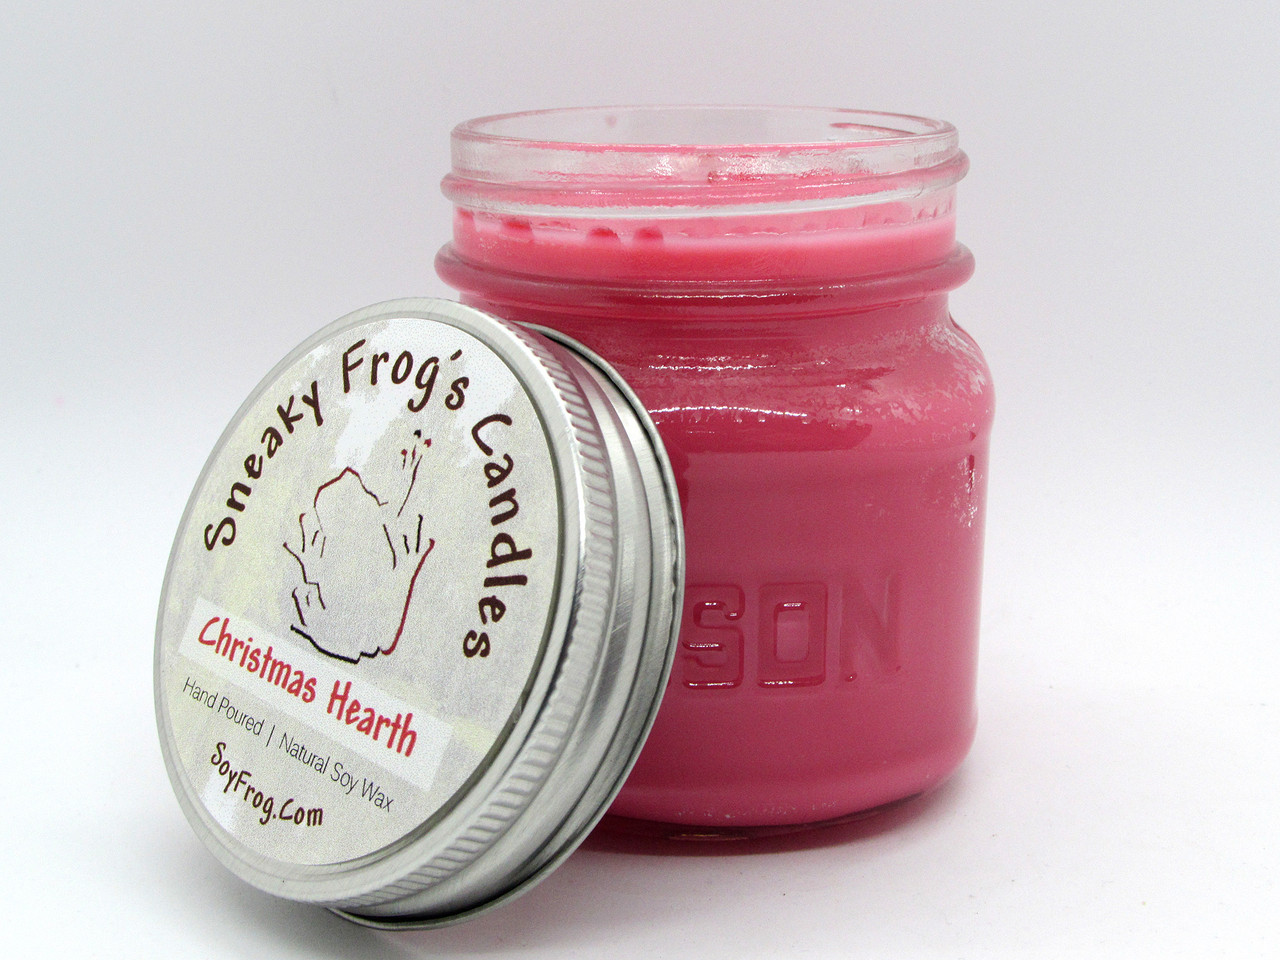 Christmas Hearth Scented Natural Soy Wax Candle